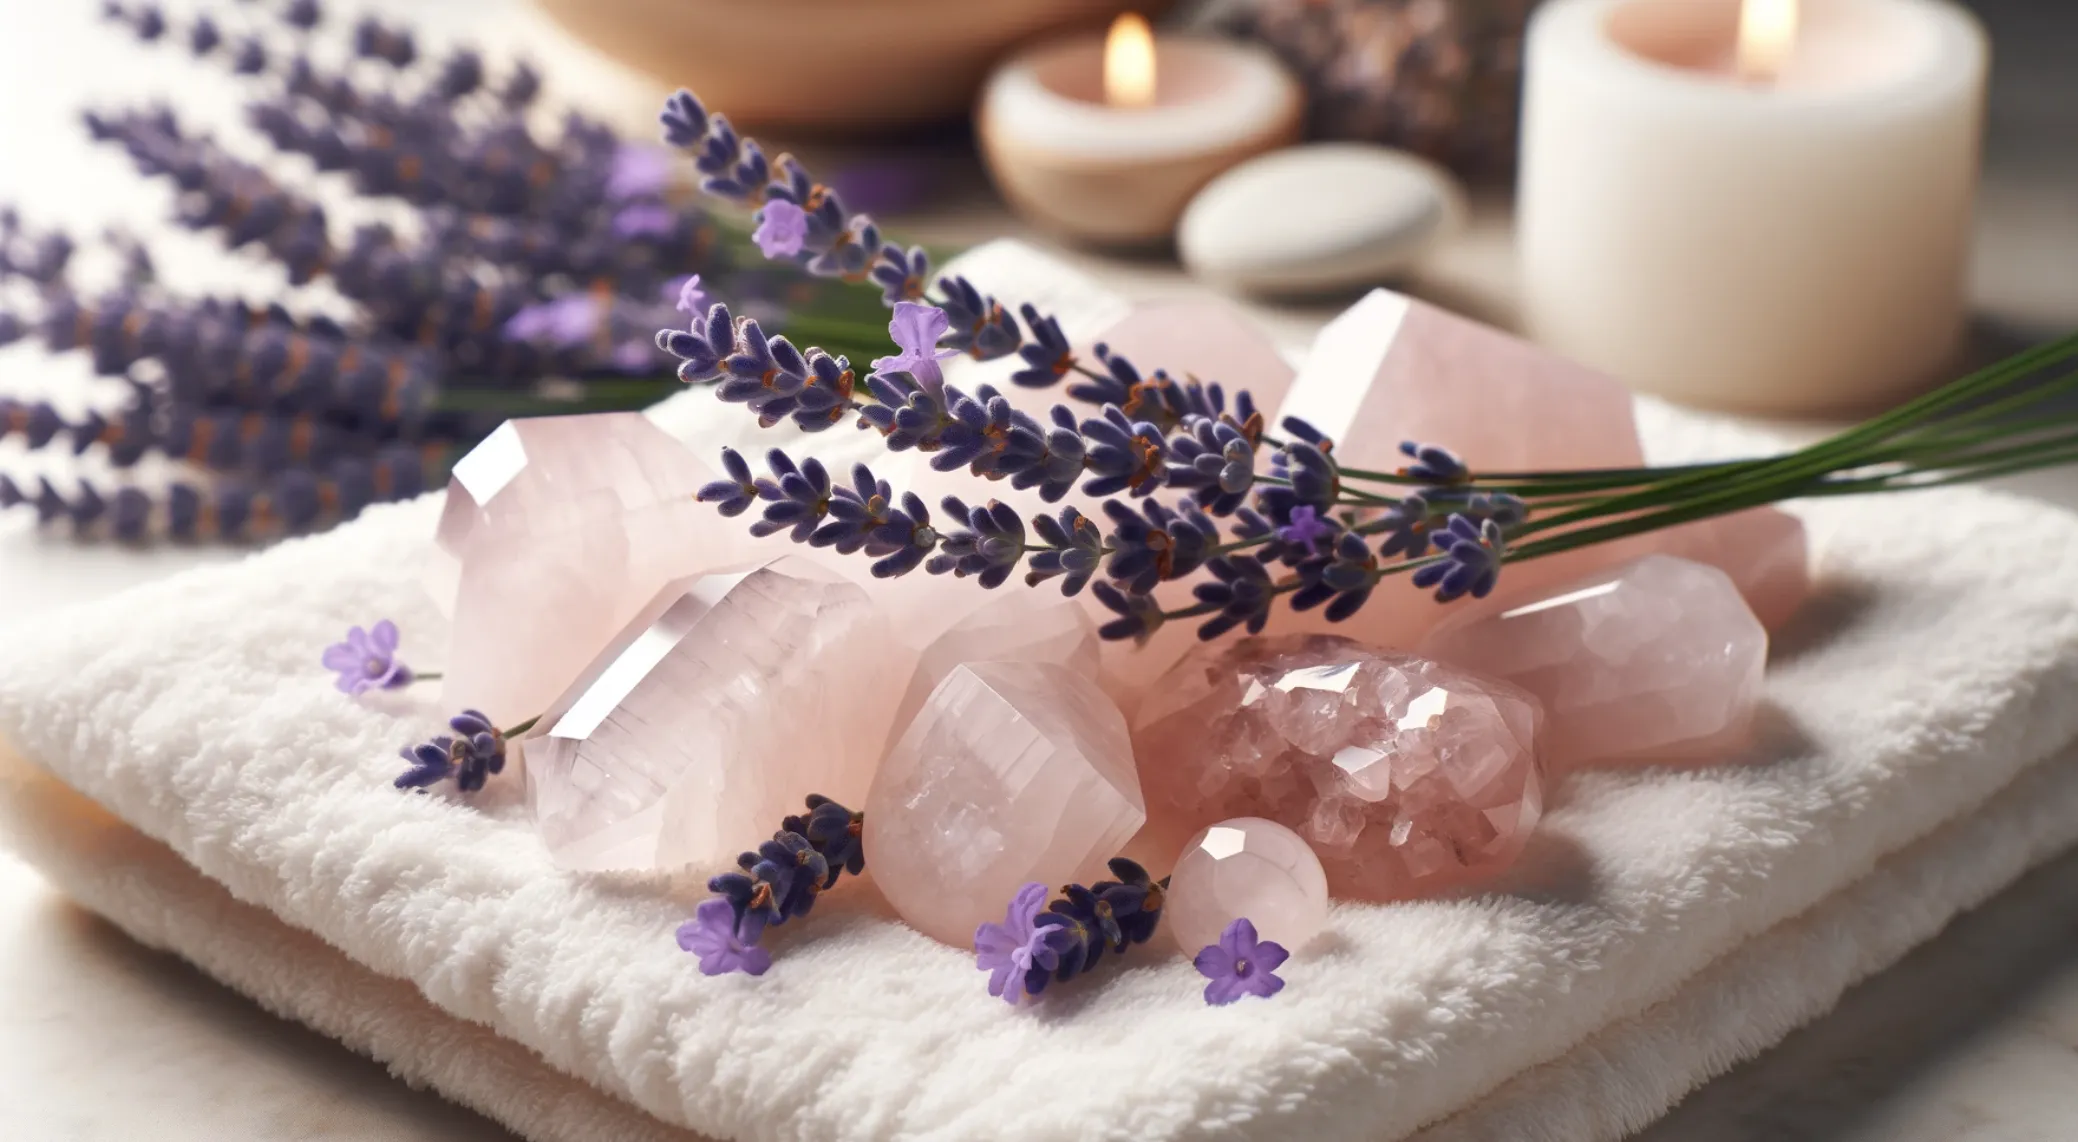 photo of rose quartz crystals with a lavender plant draped over the top